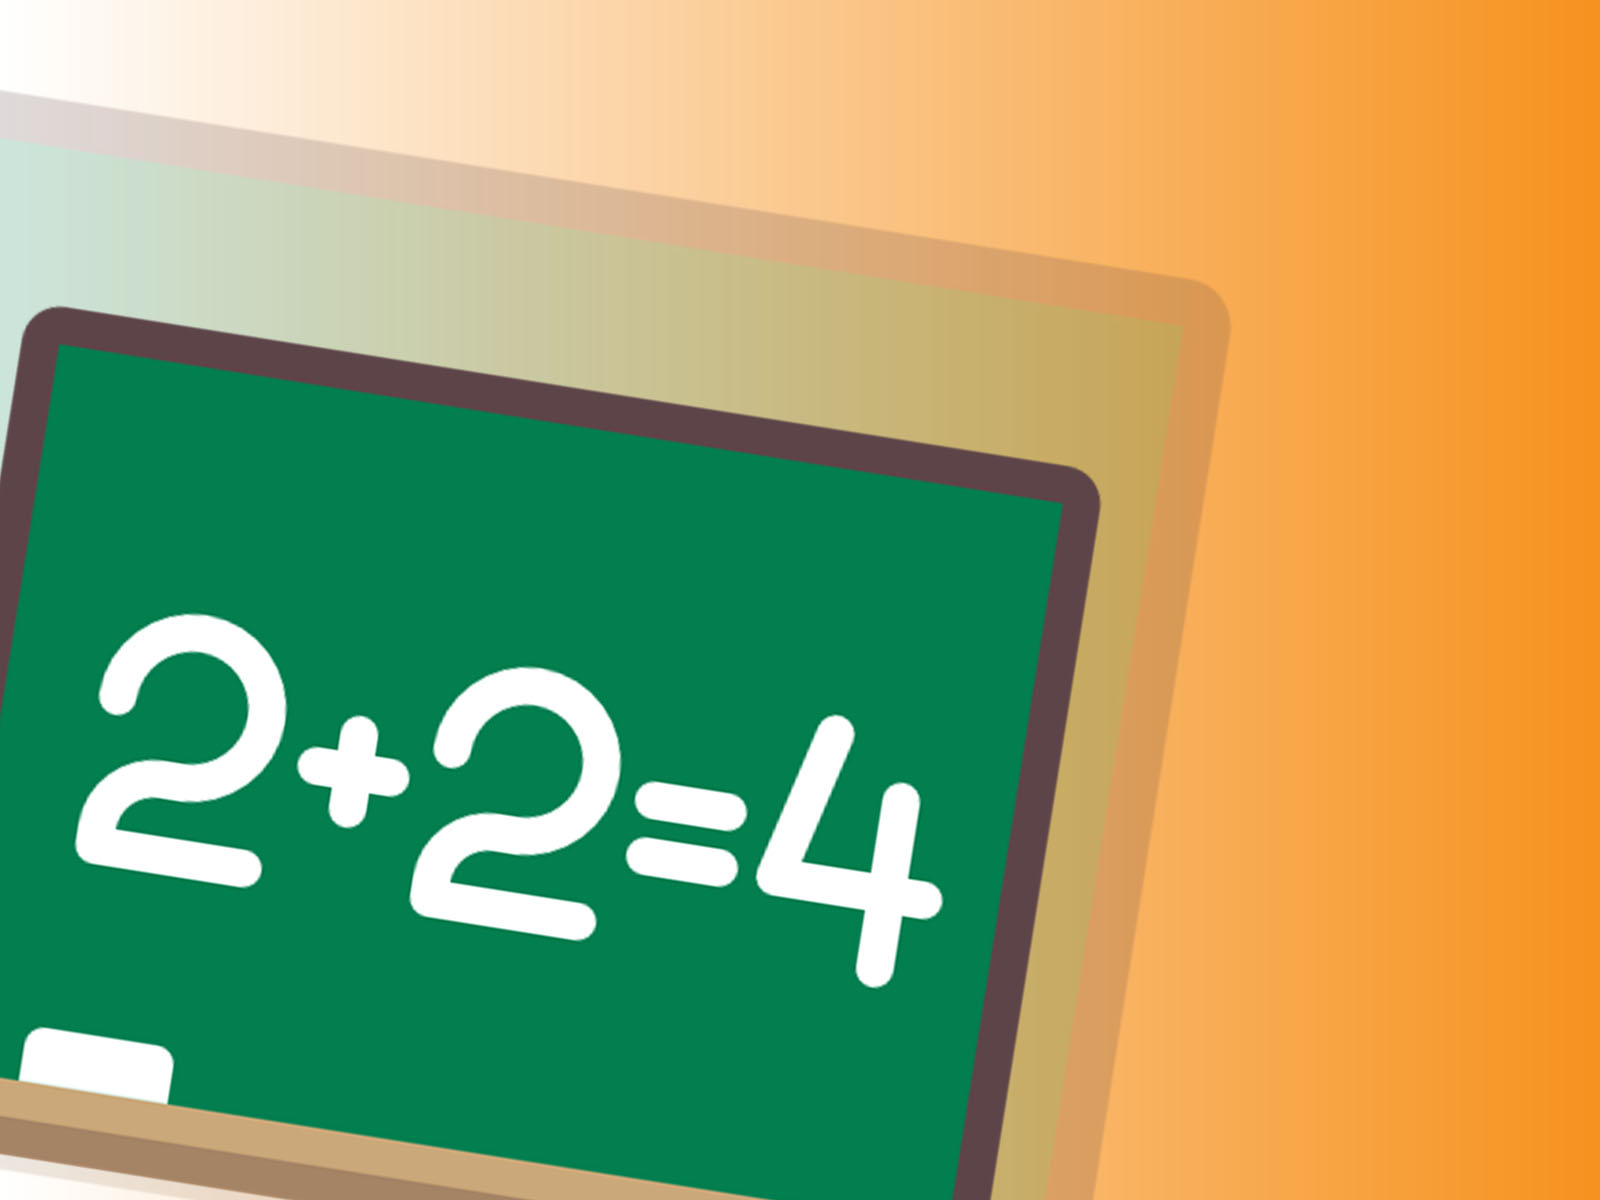 Math Board Powerpoint Templates Border Frames Education Orange Free PPT Backgrounds And